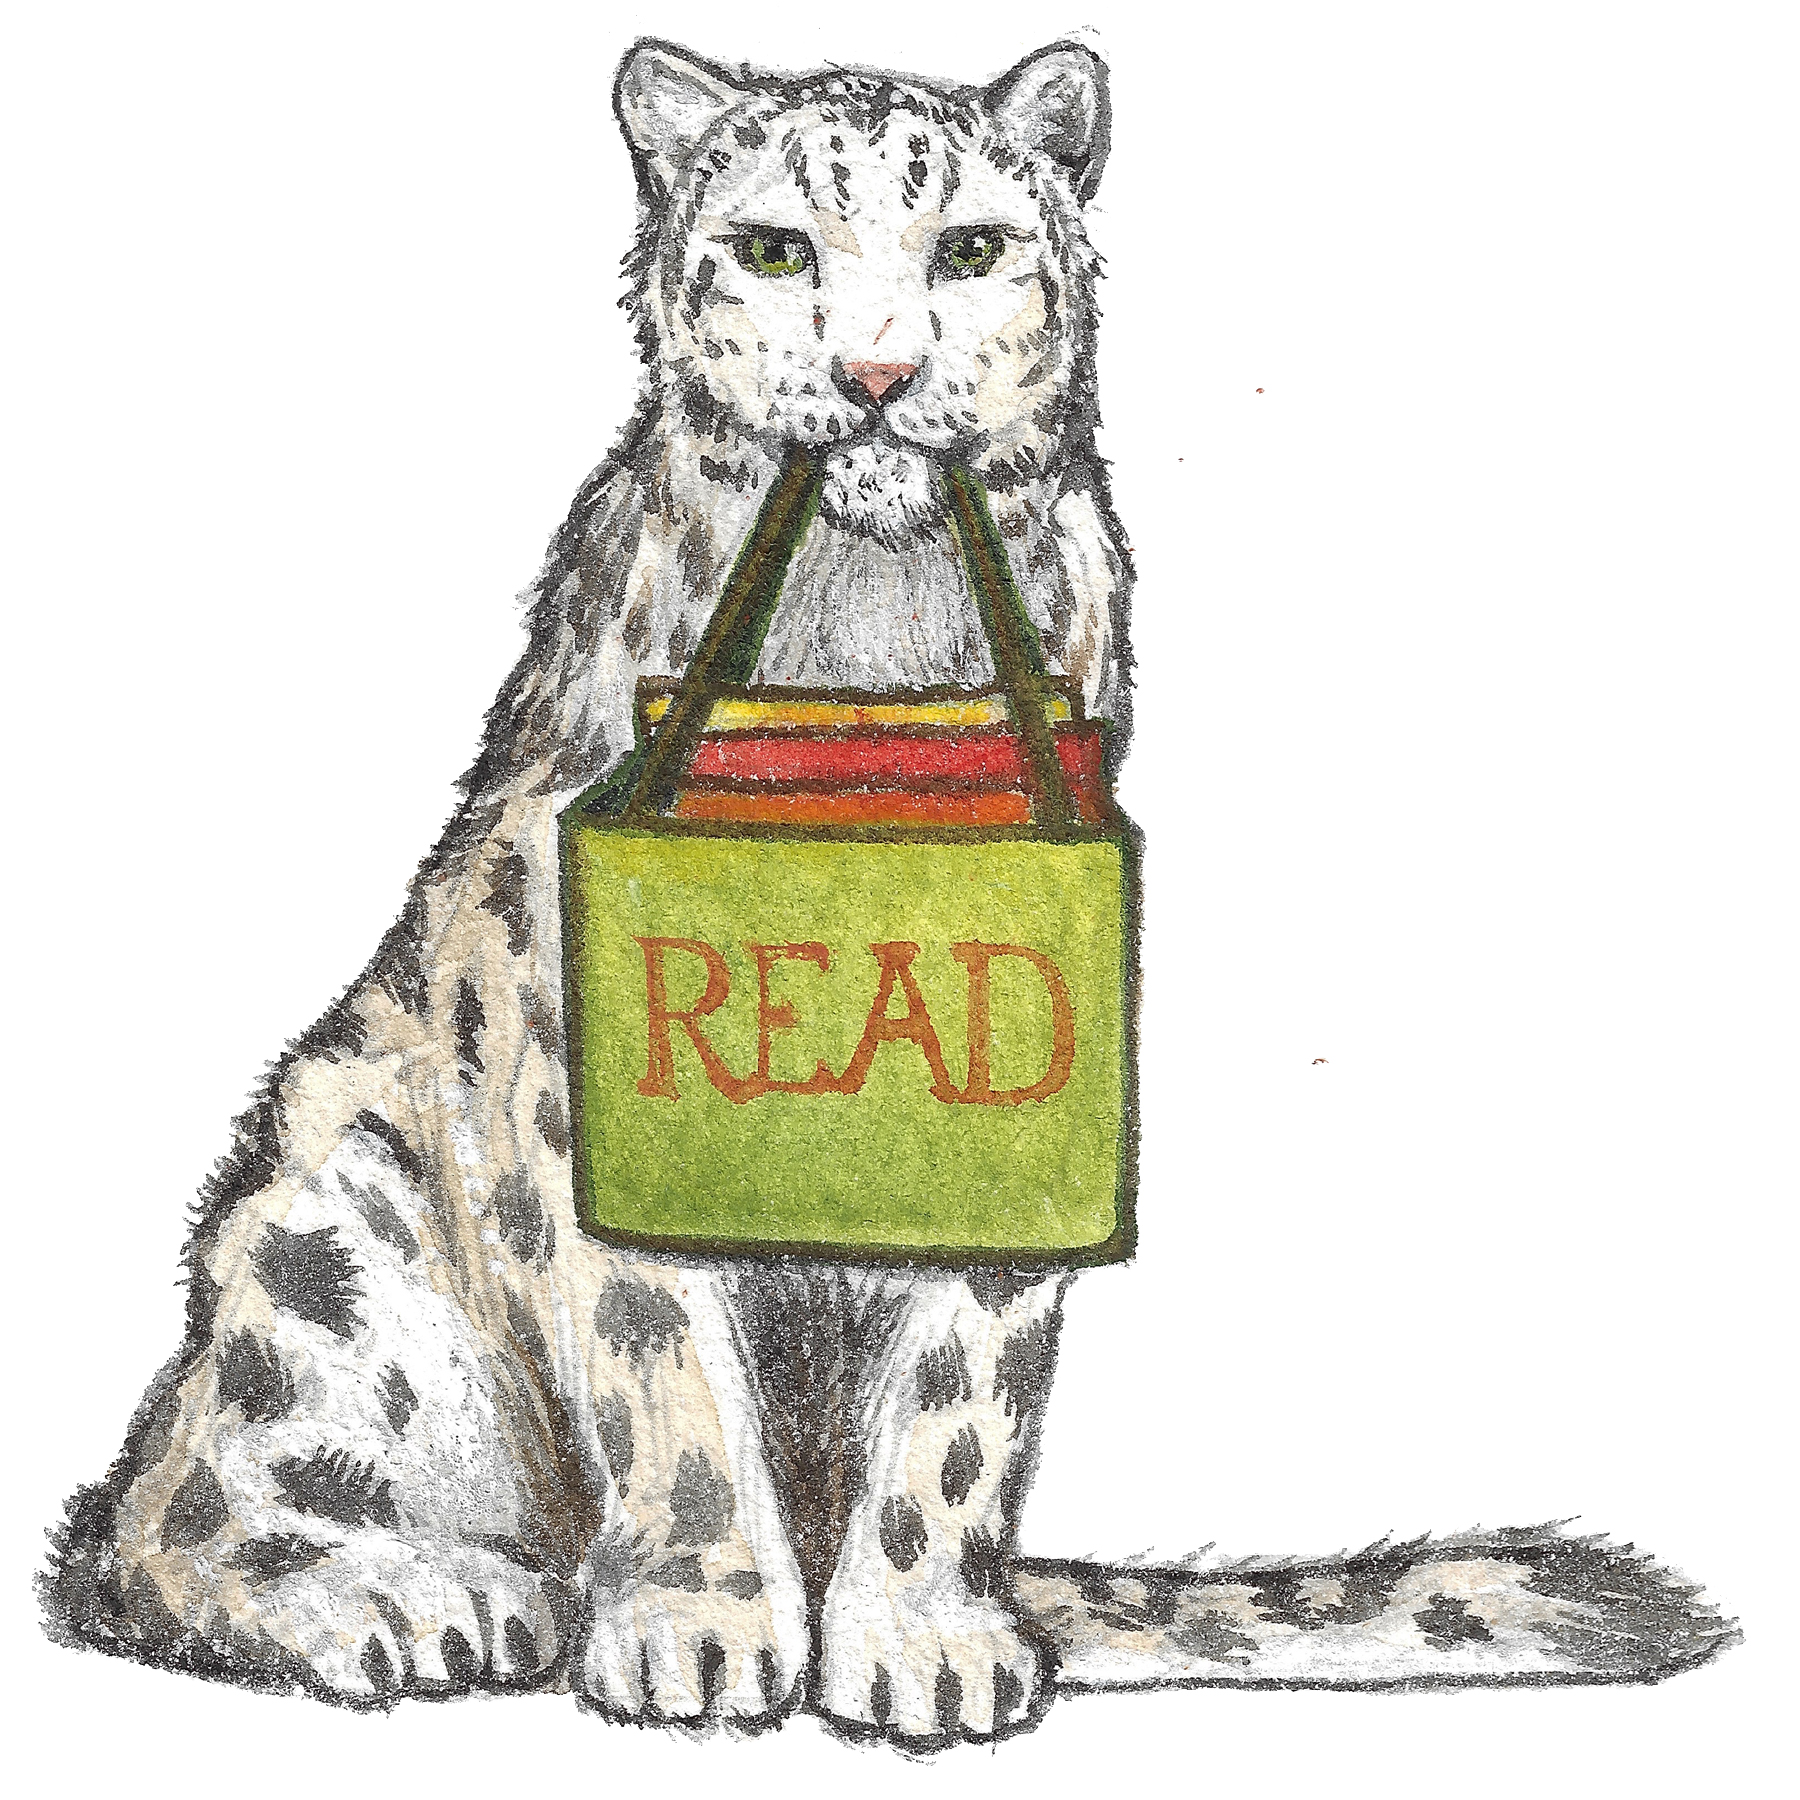 Illustrated Snow Leopard holding a green book bag that says READ